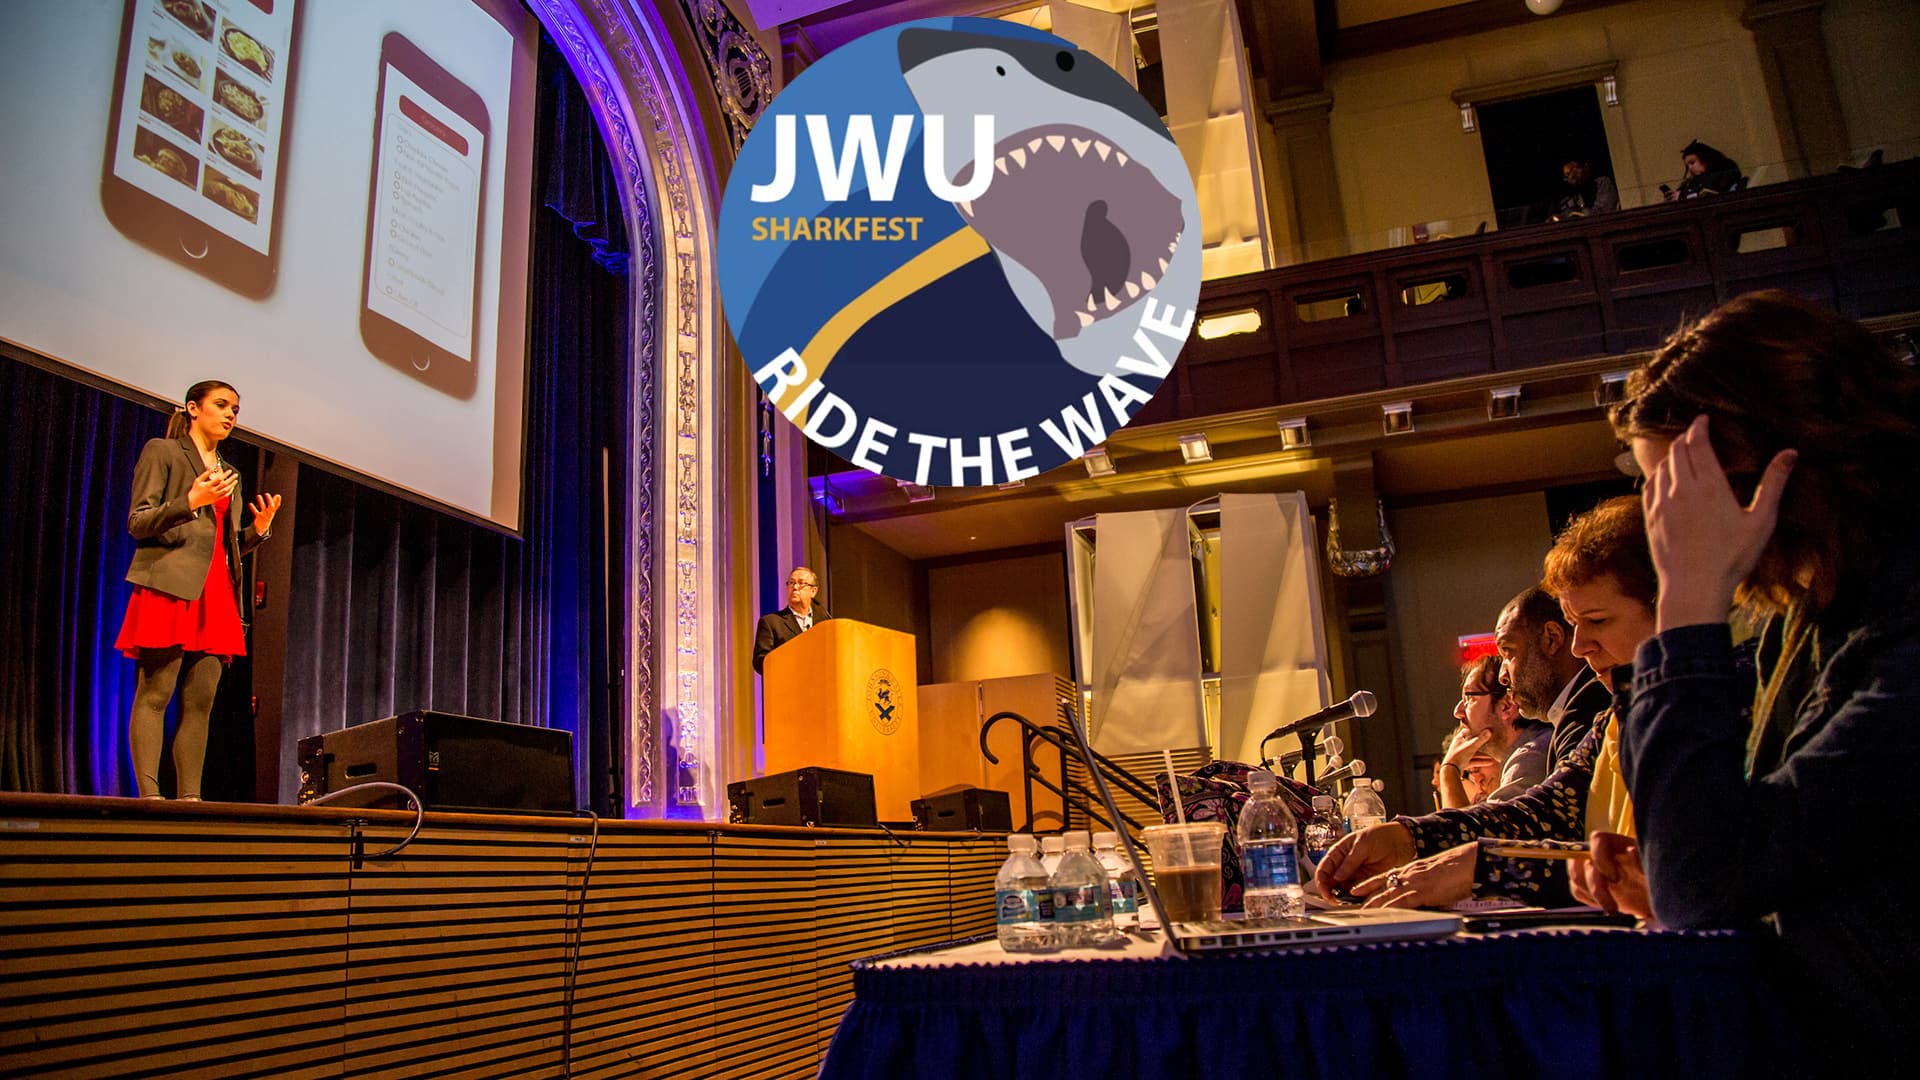 A student presenting on stage at JWU Sharkfest. The JWU Sharkfest logo is in the center.